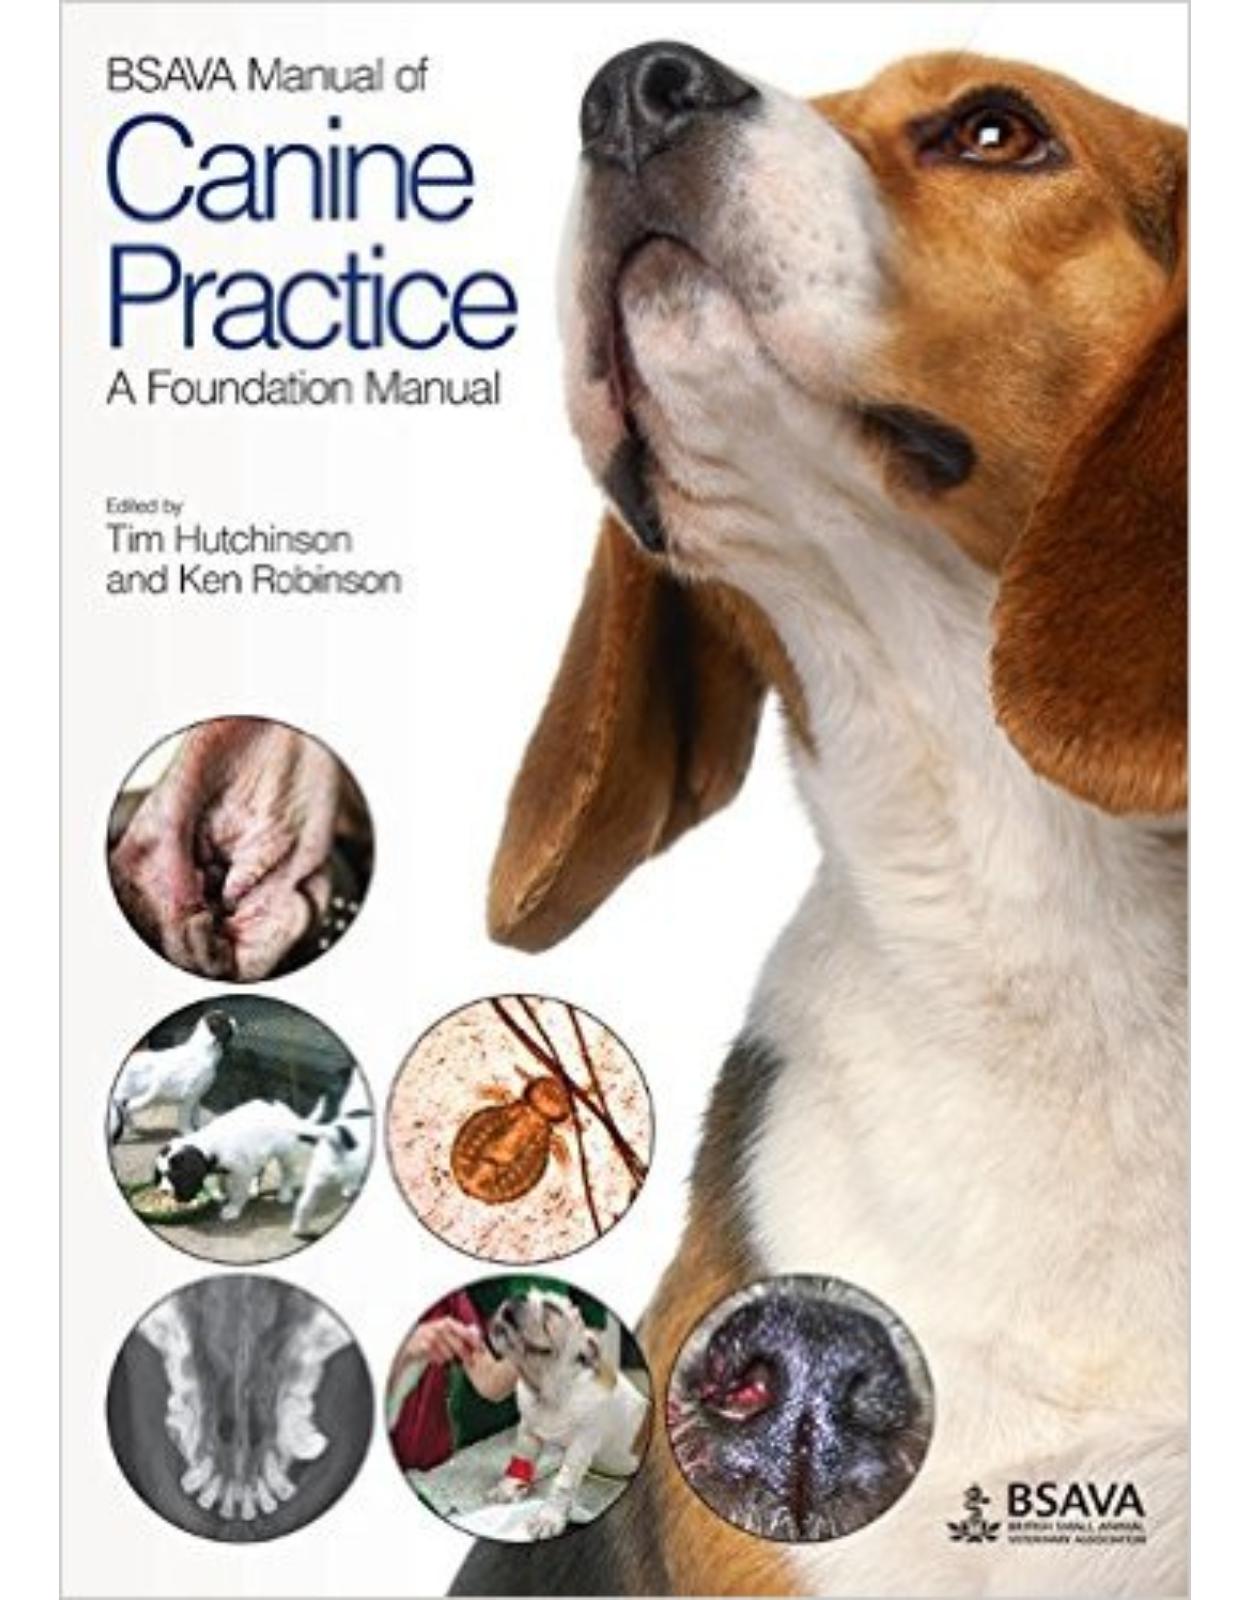 BSAVA Manual of Canine Practice